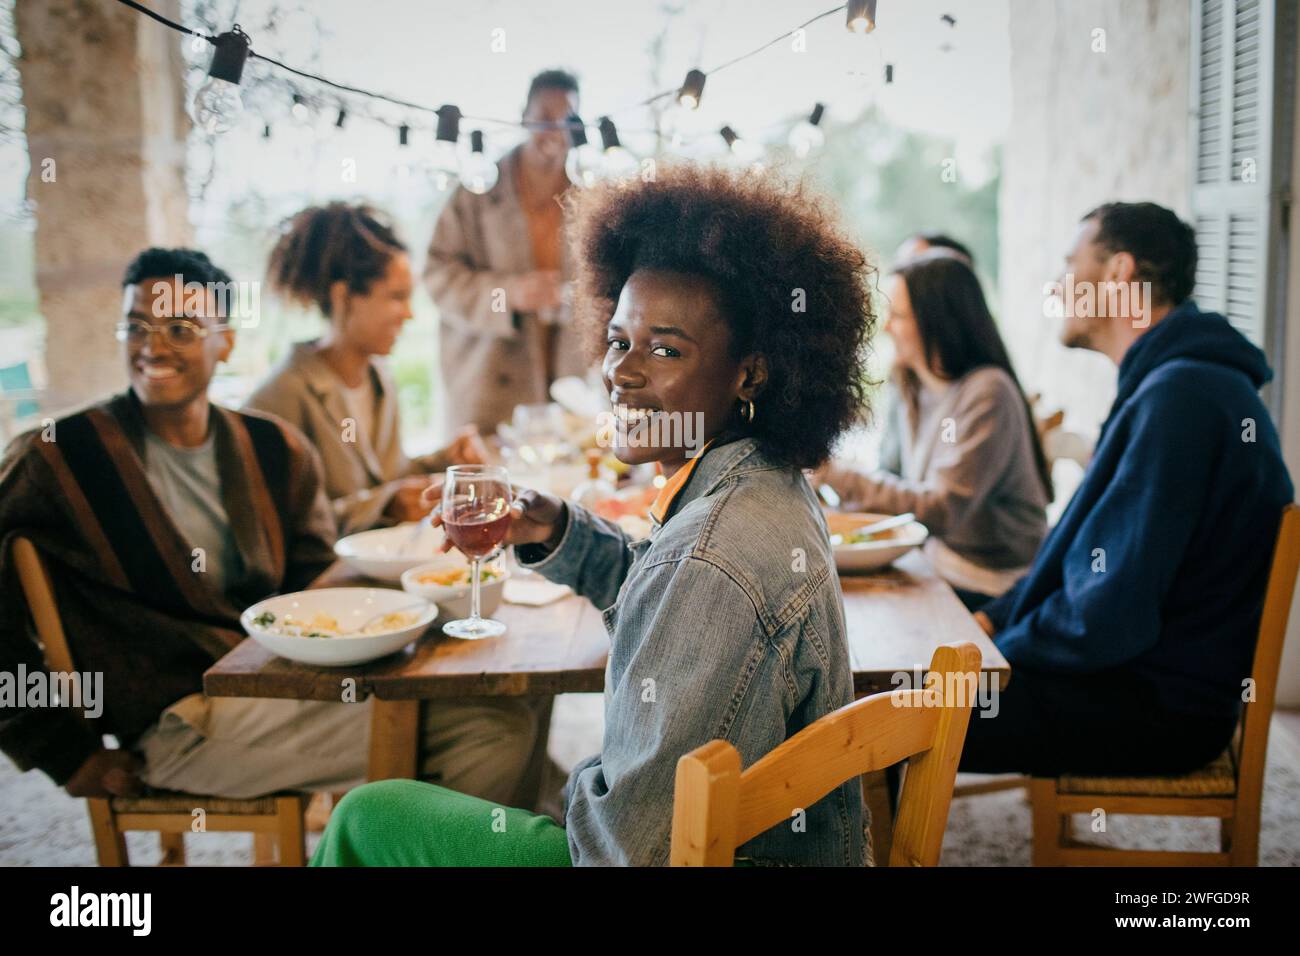 Portrait of happy woman with Afro hairstyle holding wineglass during dinner party in patio Stock Photo